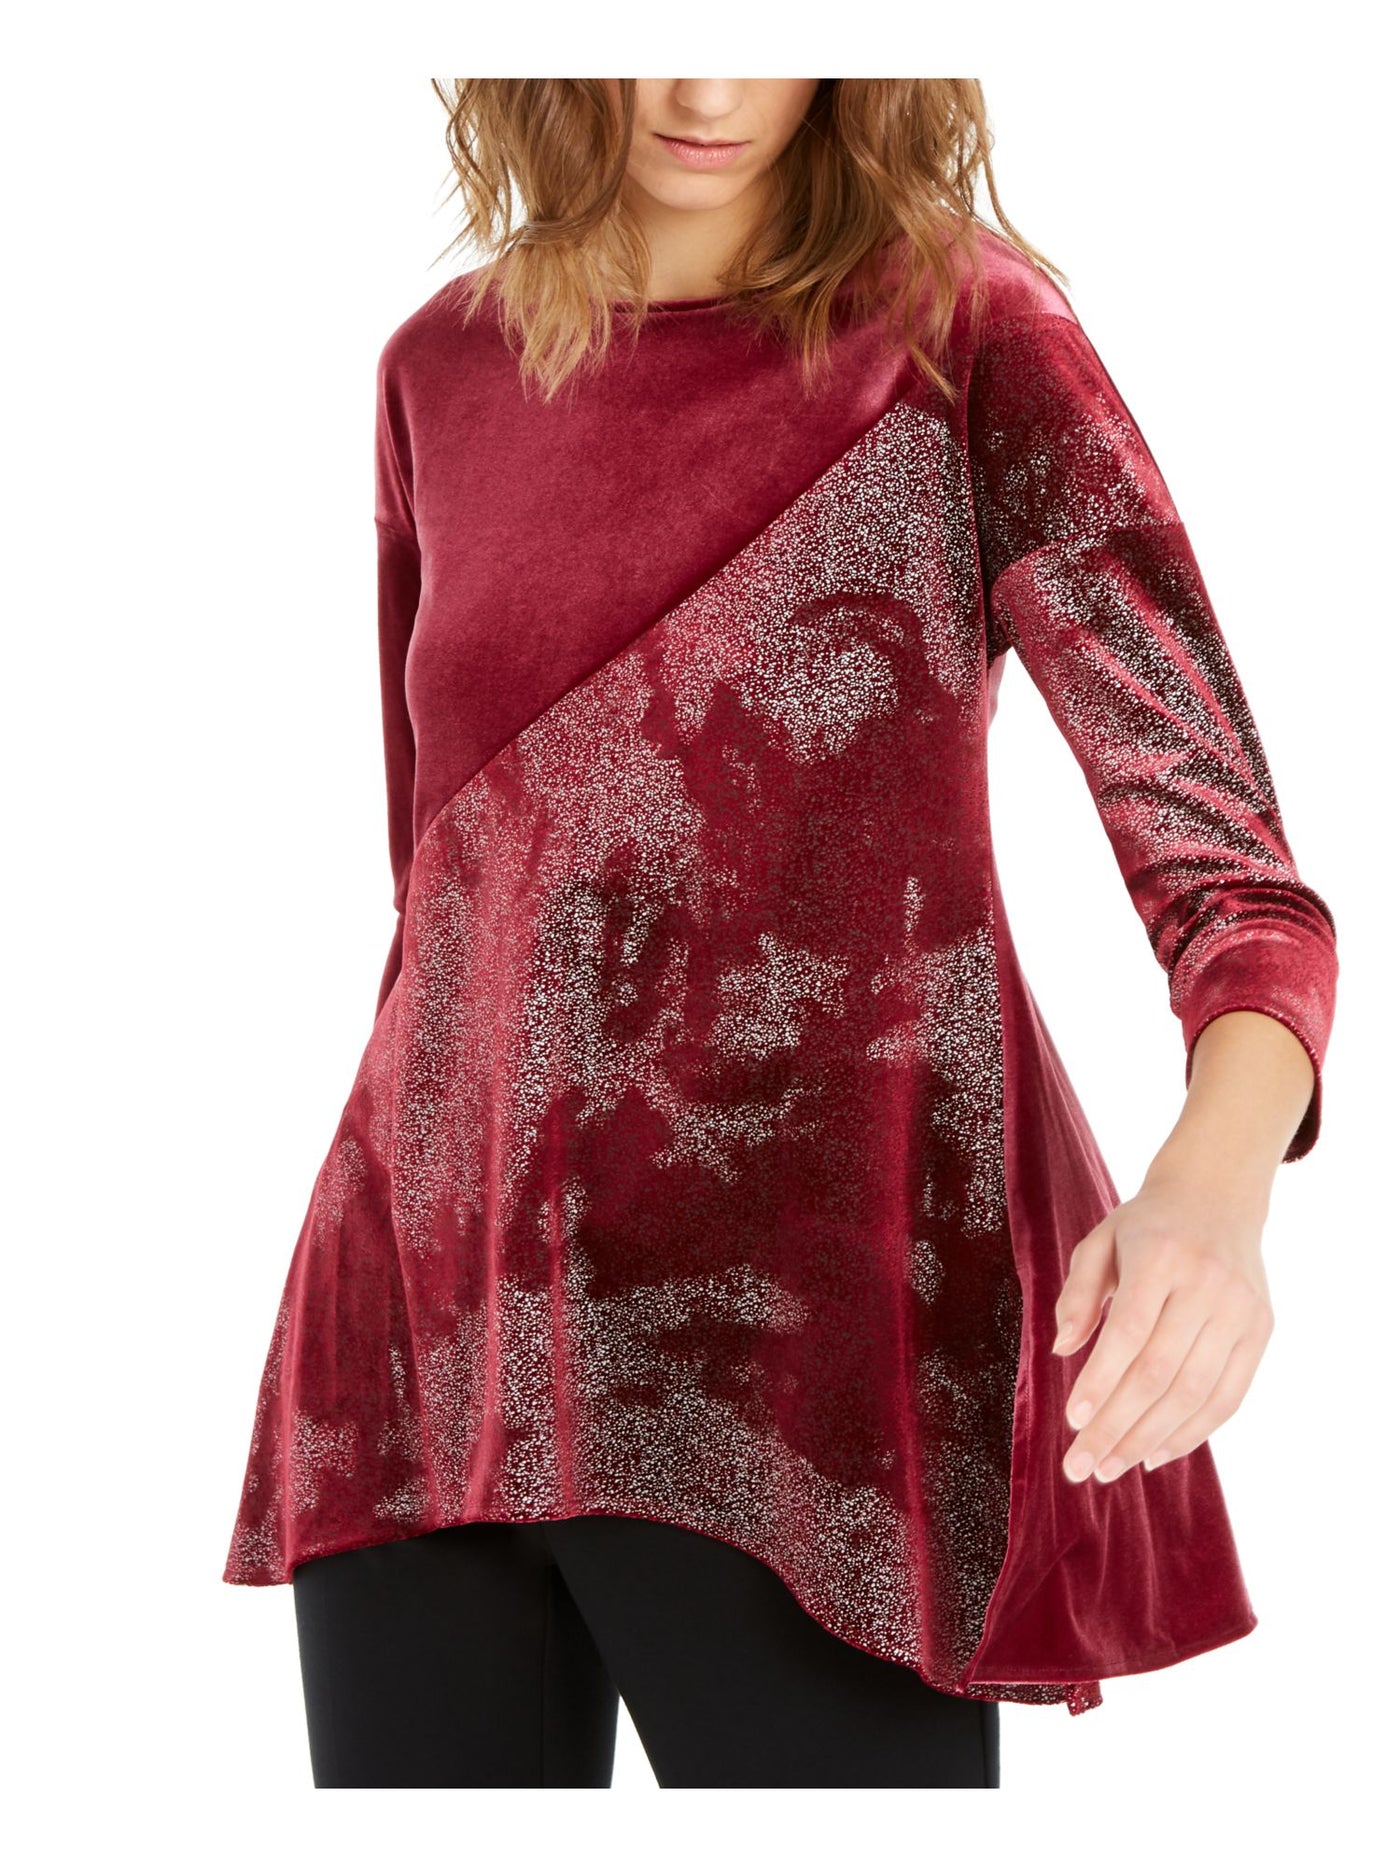 ALFANI Womens Red Speckle 3/4 Sleeve Crew Neck Evening Blouse S